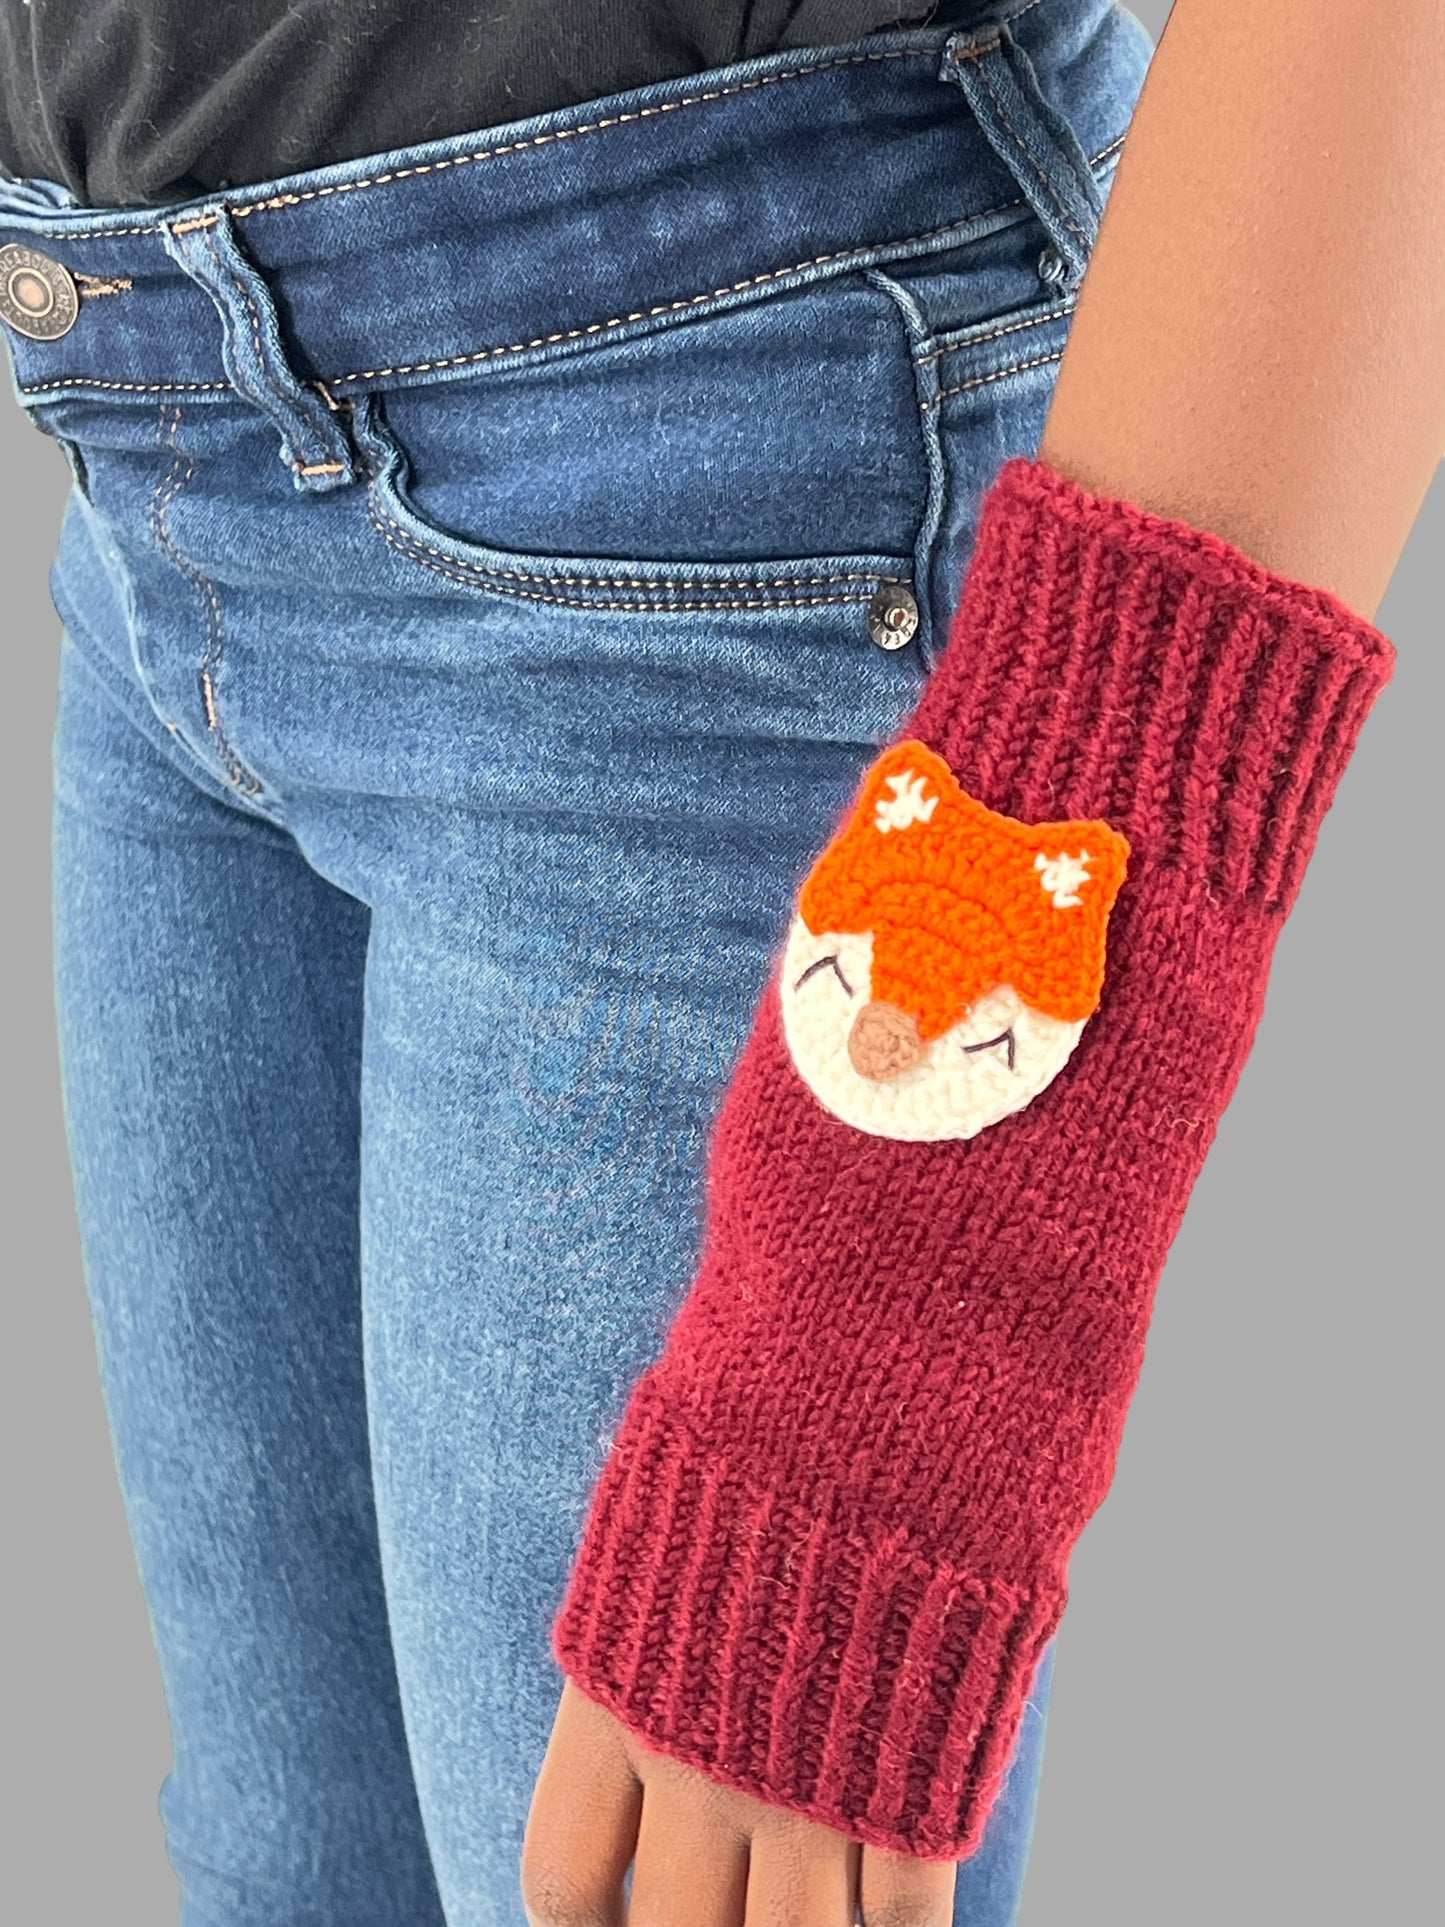 Cute Fox Crochet Leg Warmers . Ideal Gift for Girls . Granddaughter, Daughter, Niece . Perfect for Stocking Stuffers, Baby Showers, Back-to-School